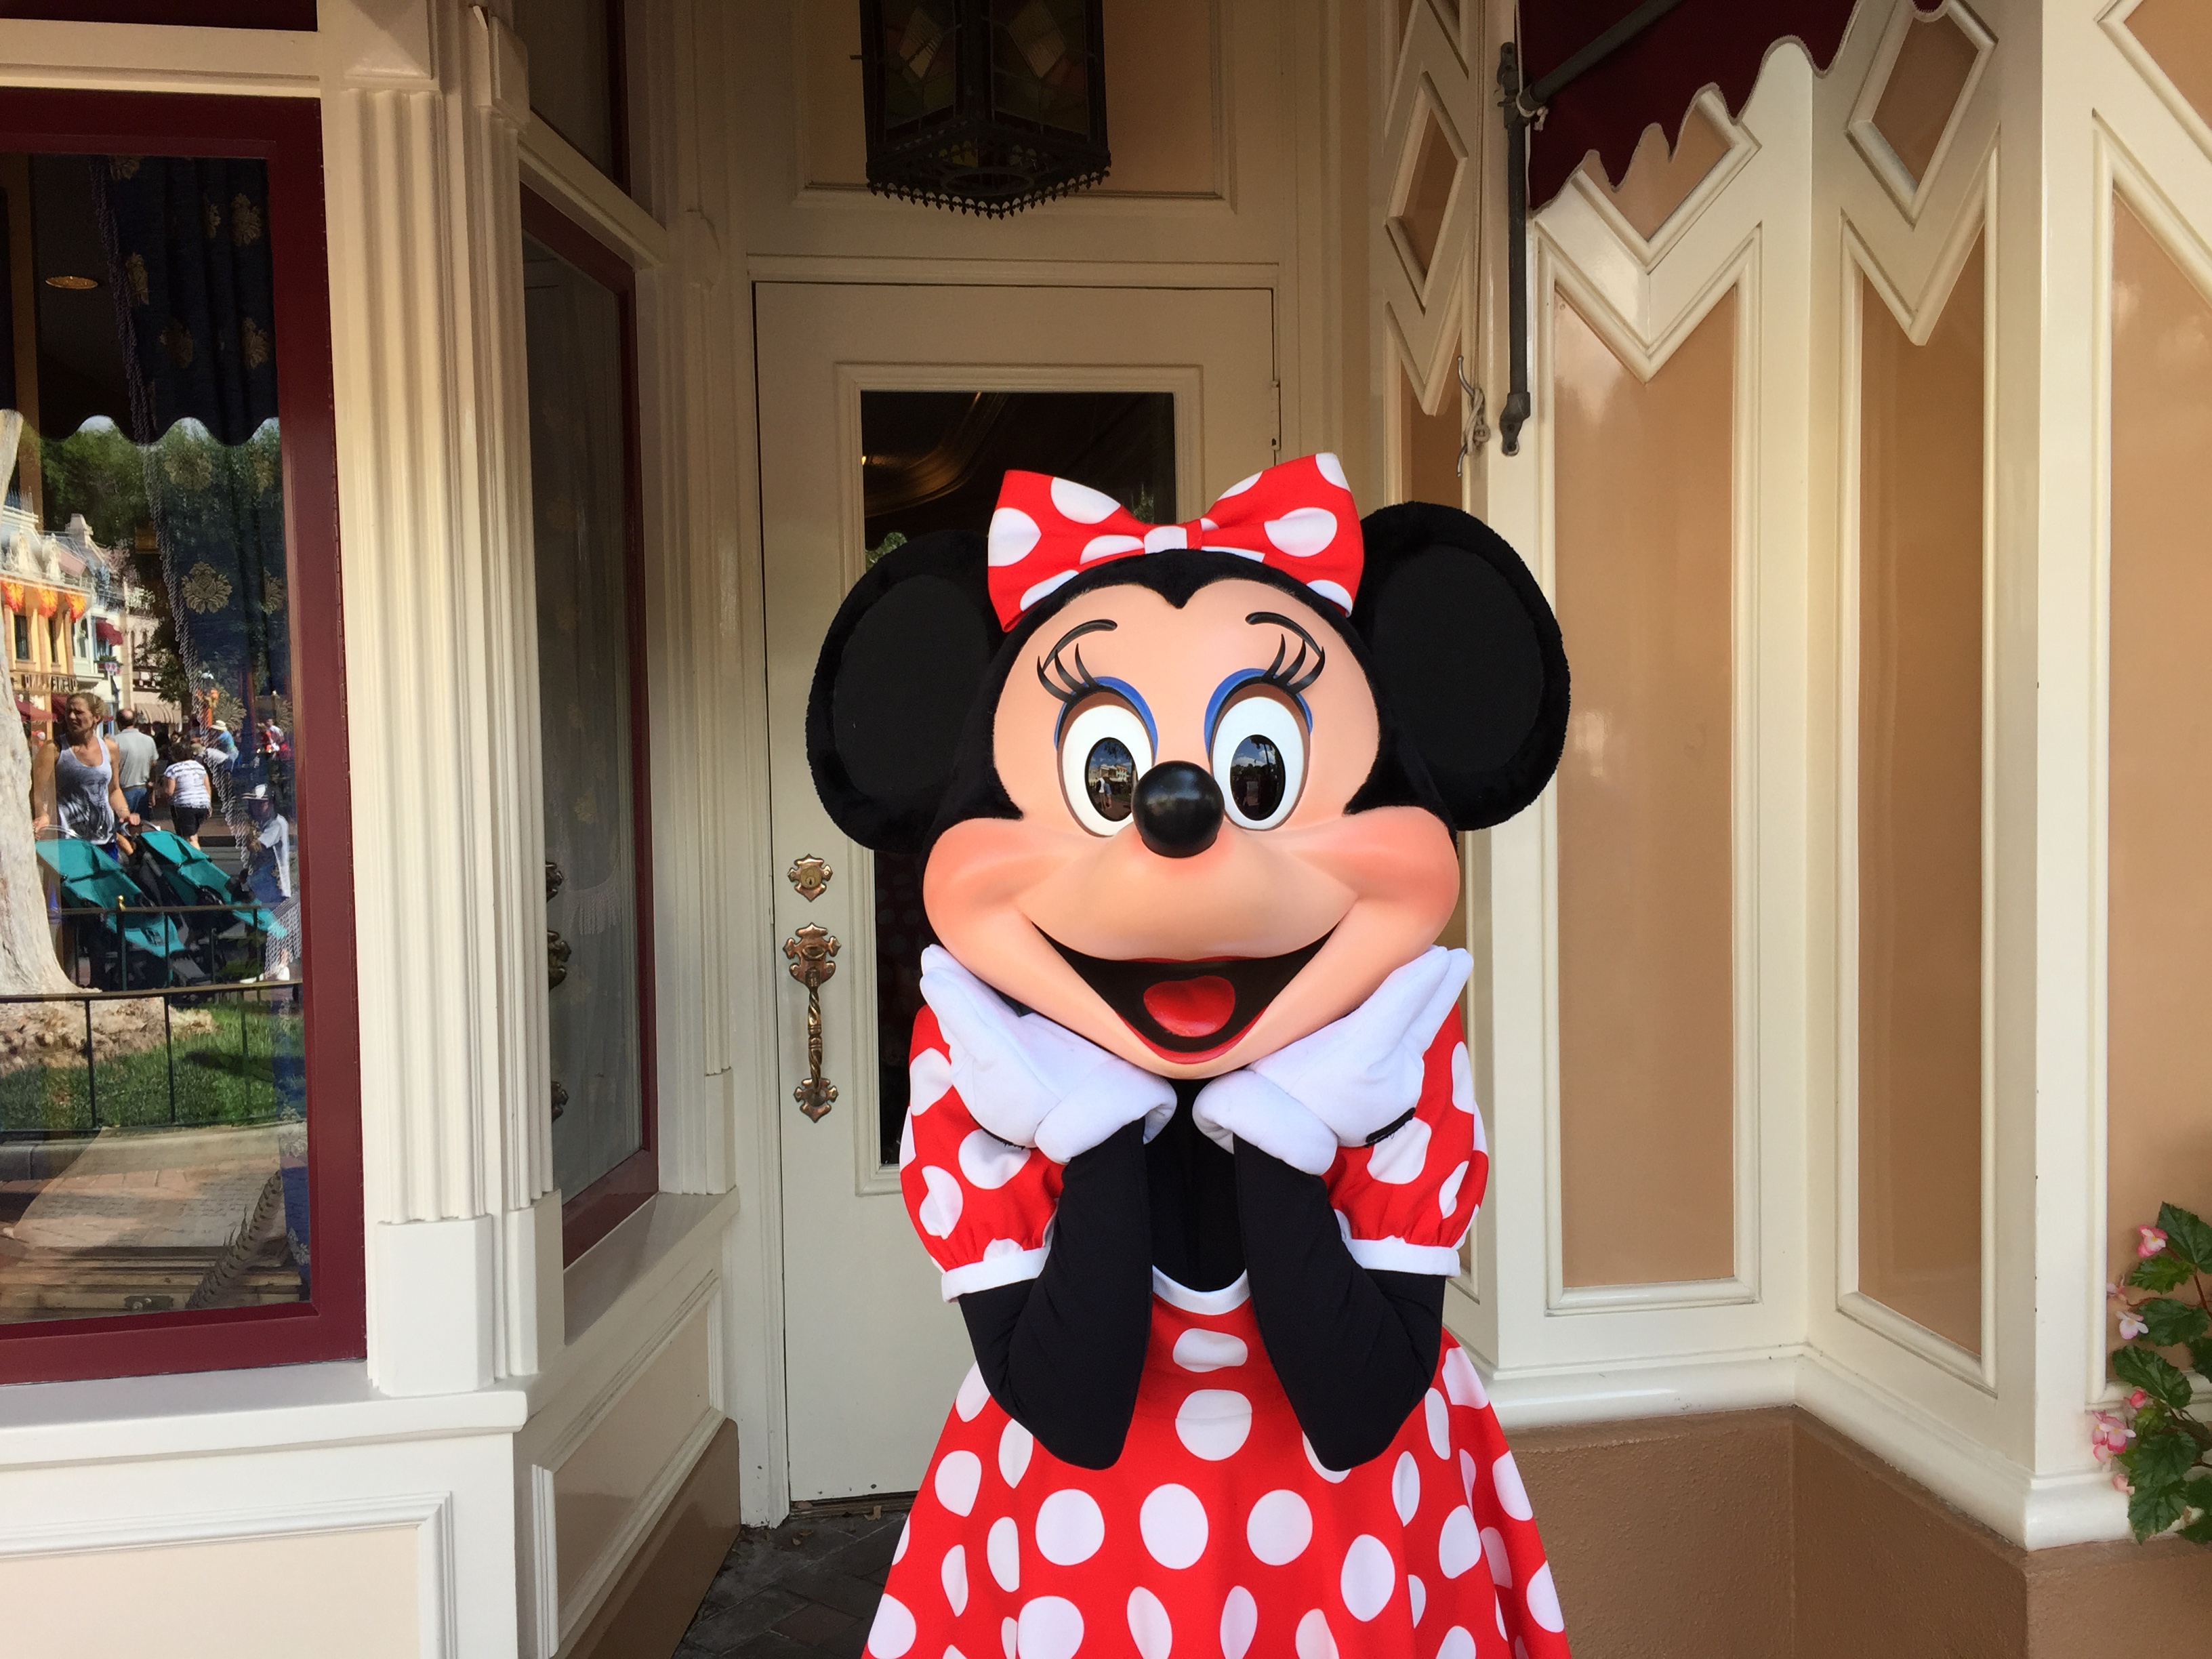 dining-review-of-character-breakfast-with-minnie-and-friends-at-the-plaza-inn-at-disneyland